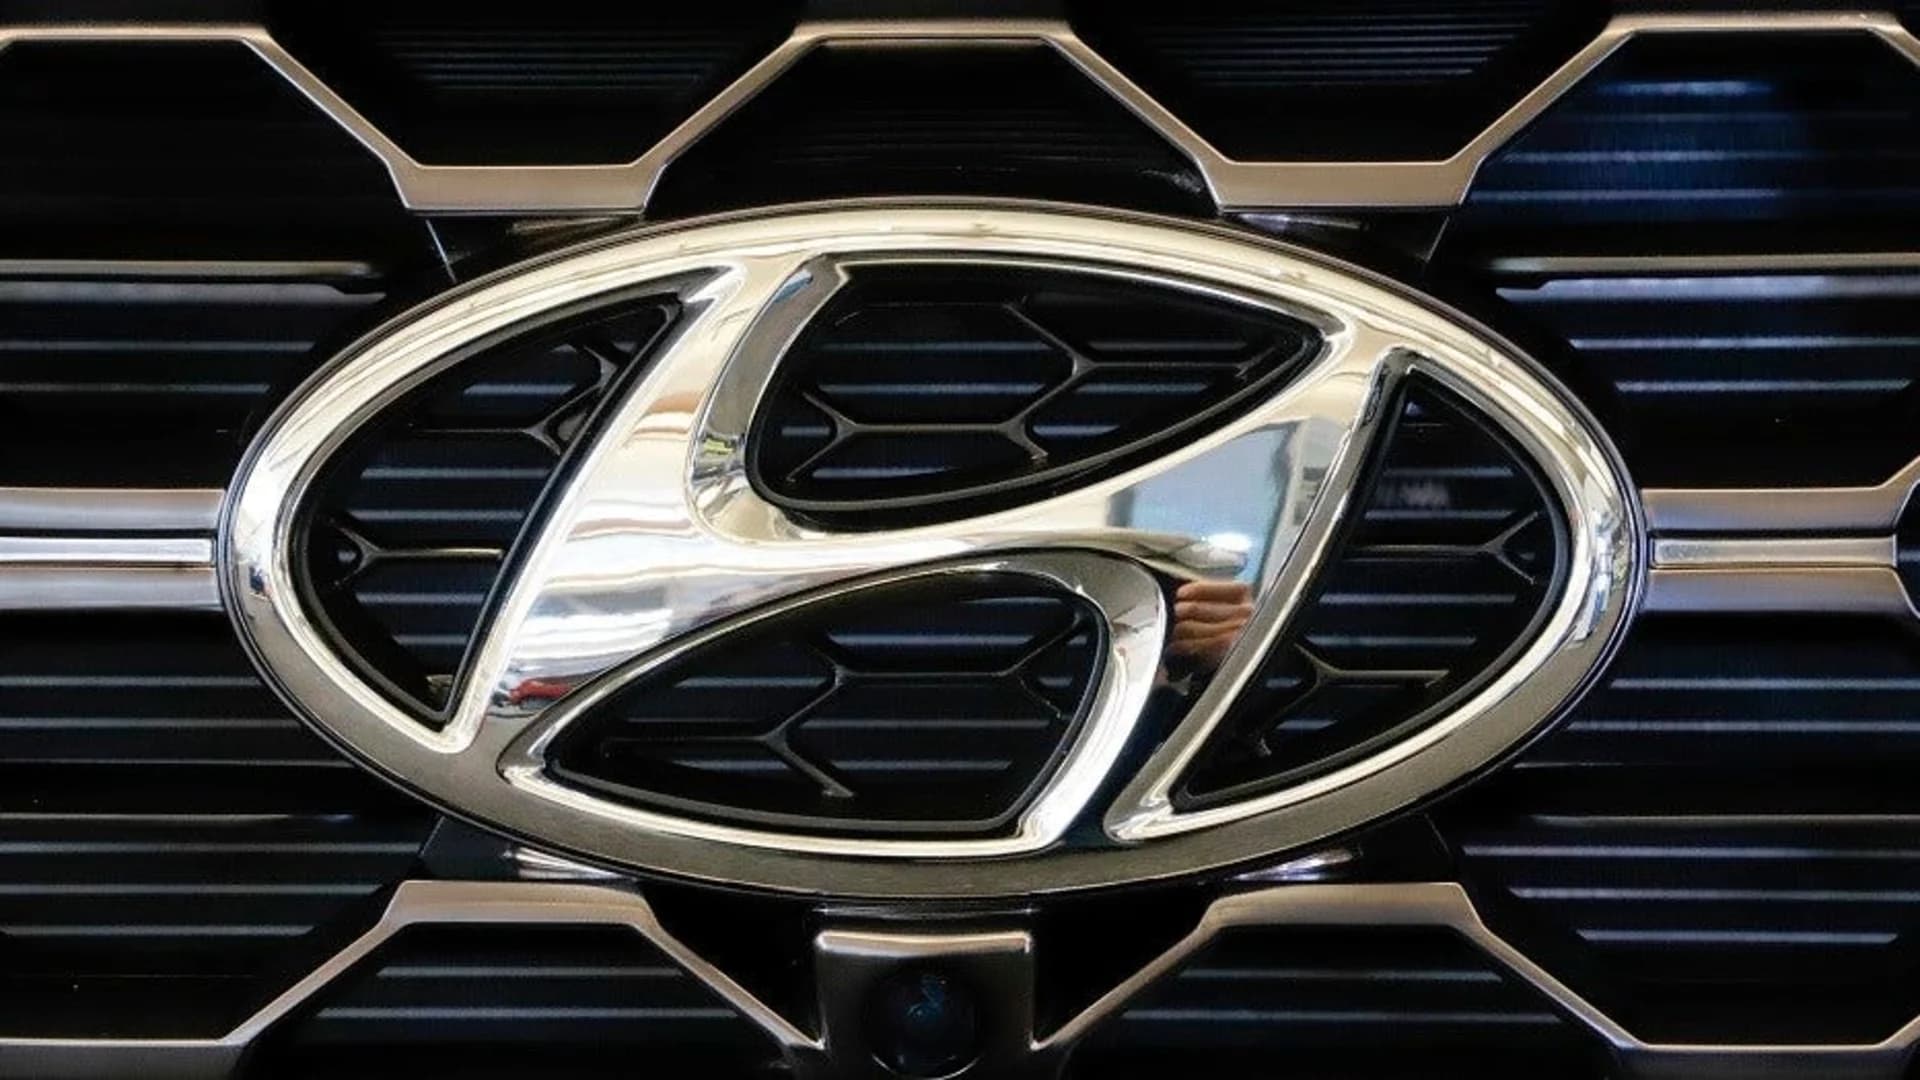 Hyundai says owners of recalled vehicles should park them outside due to fire risk